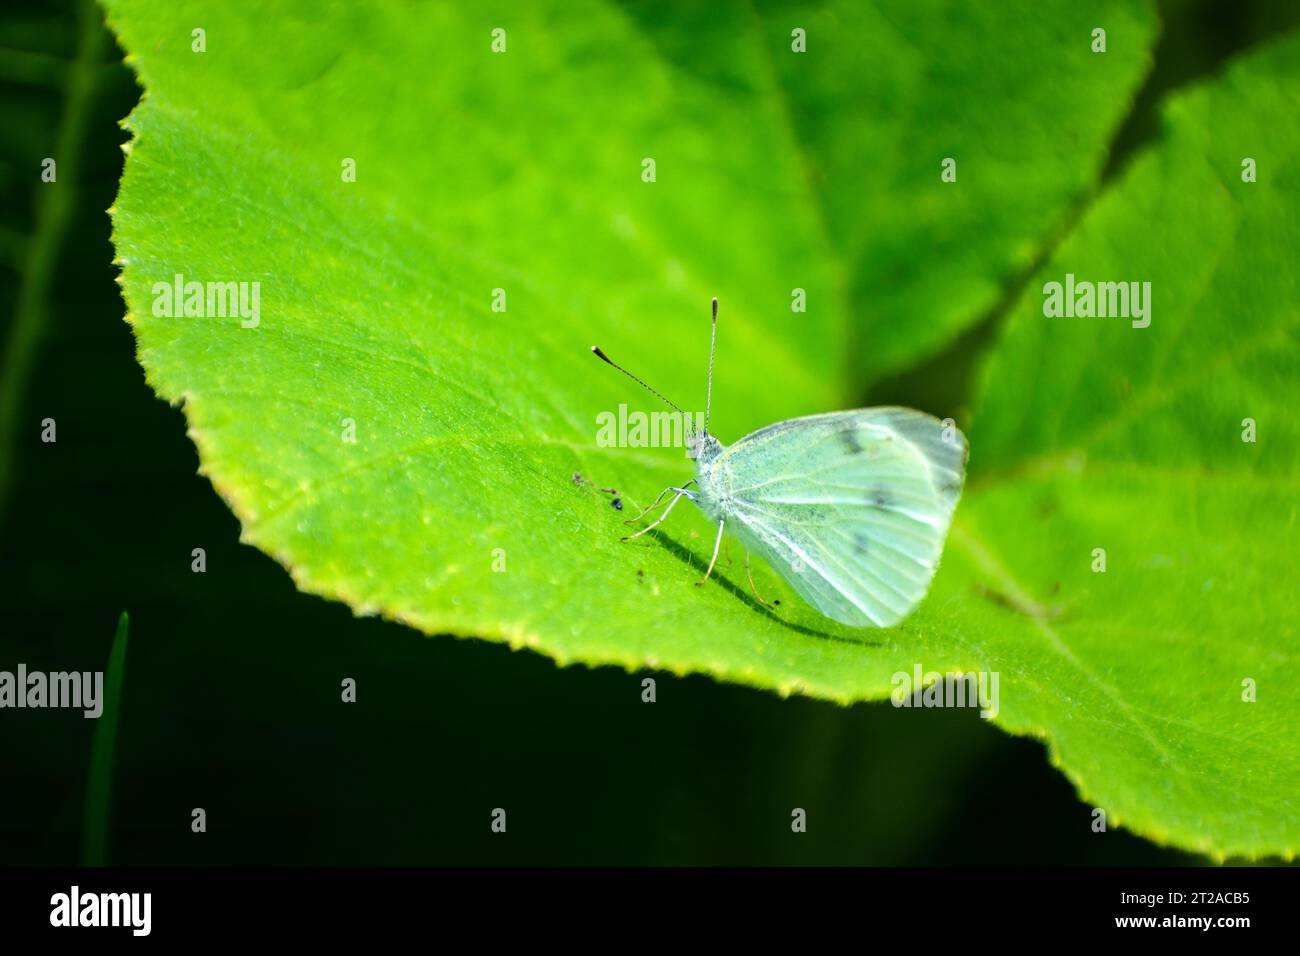 Cabbage butterfly sits on a large green leaf, summer view Stock Photo